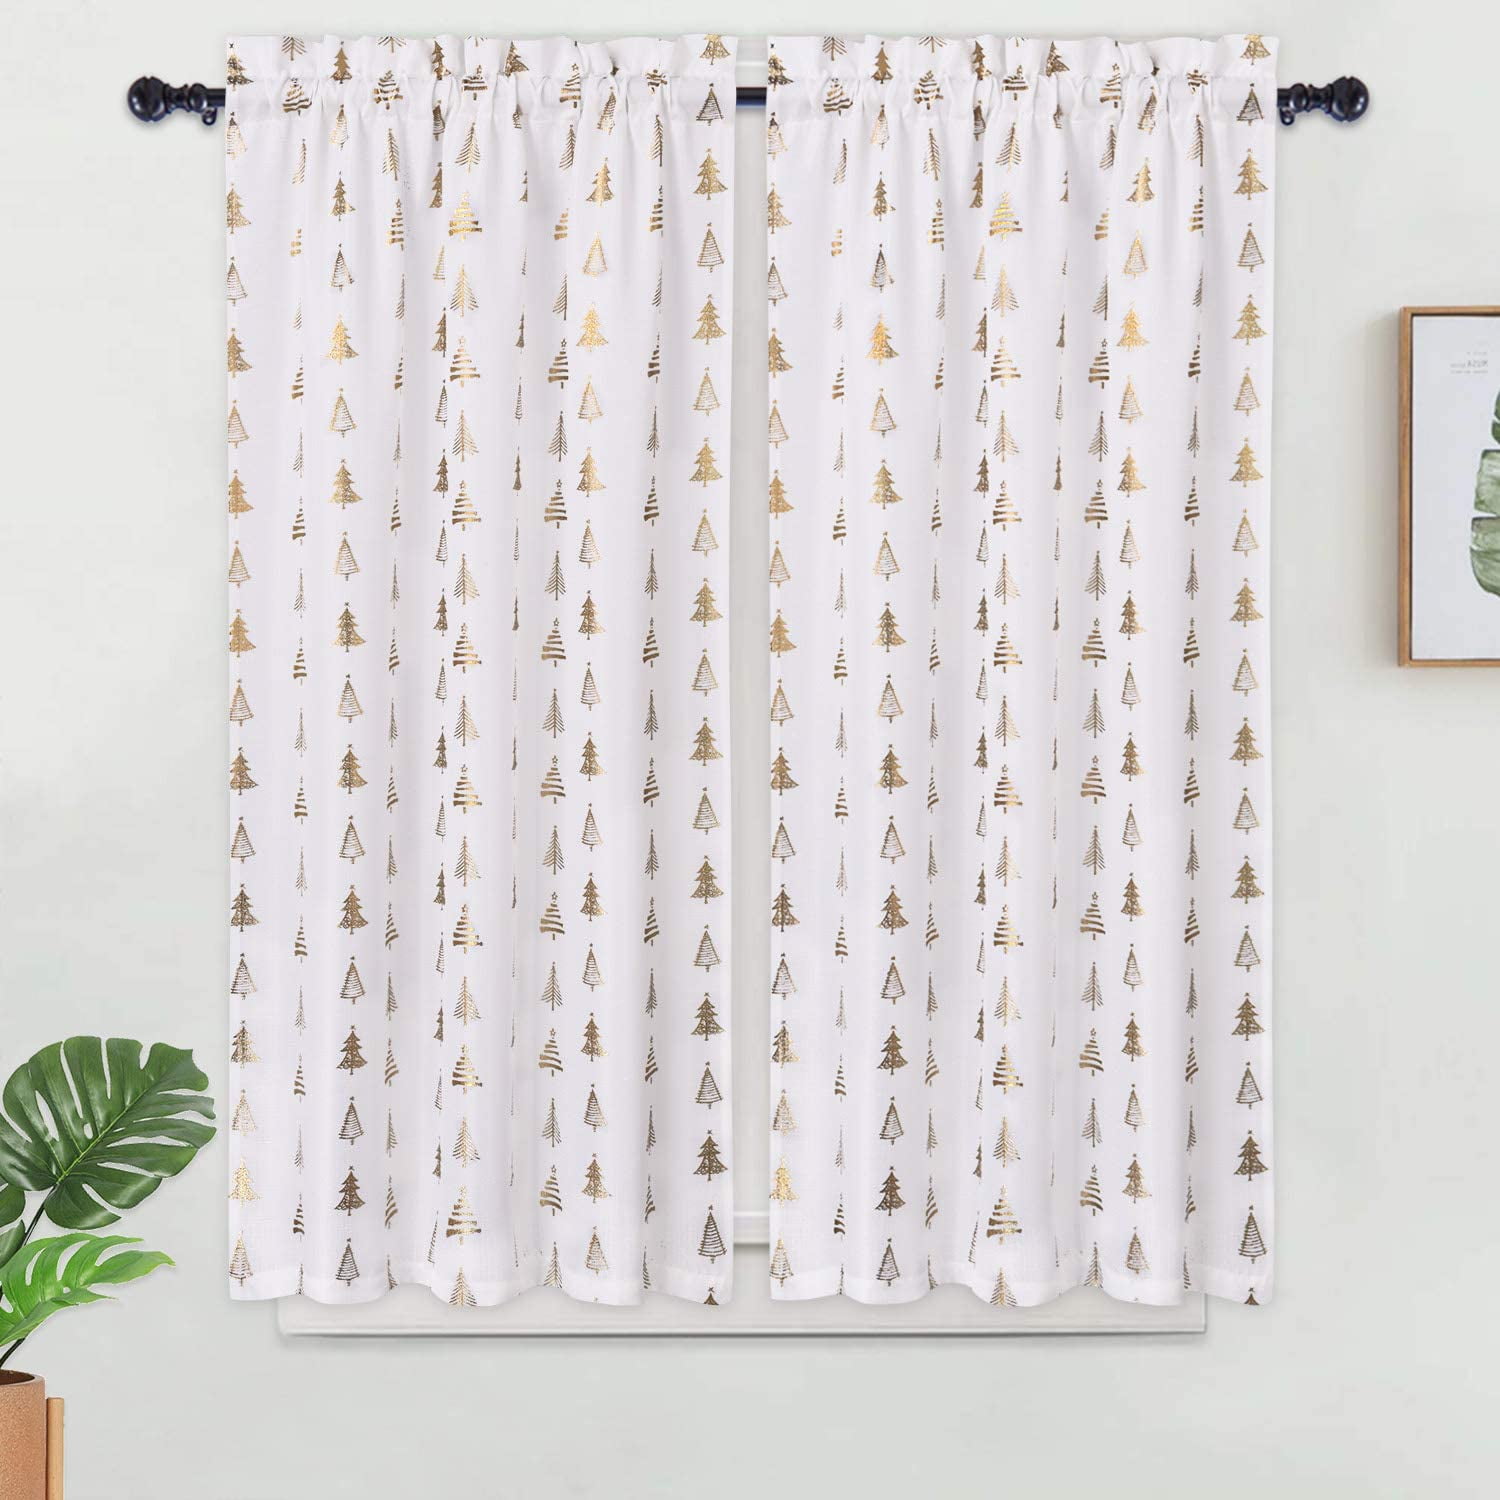 Waffle Woven Textured Rod Pocket Short Tier Curtains for Bathroom Cafe Kitchen Curtains CAROMIO Navy Blue Kitchen Curtains 45 Inch 1 Pair